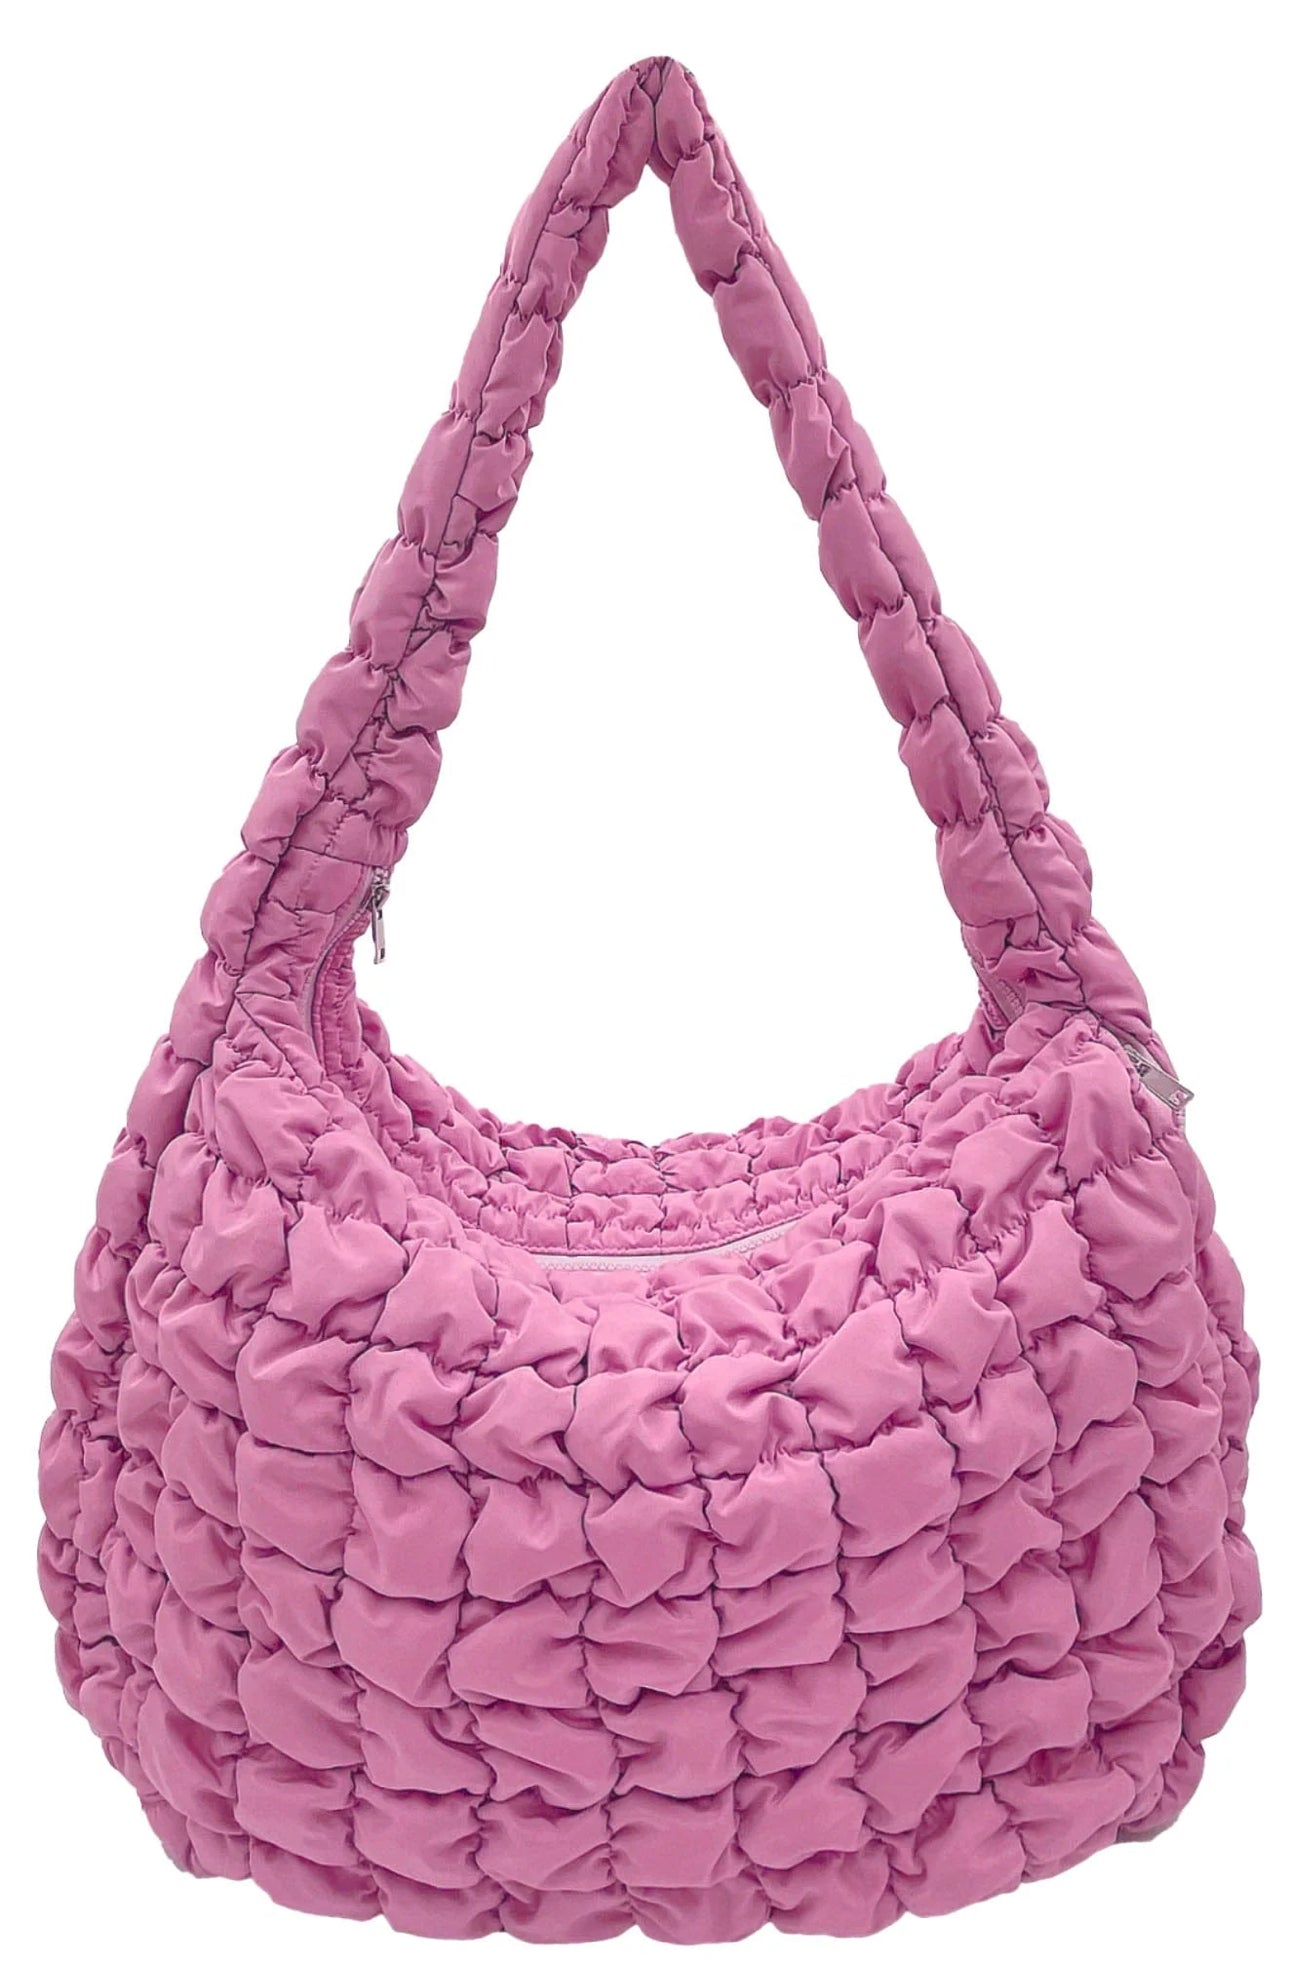 The Quilted Bubble Bag